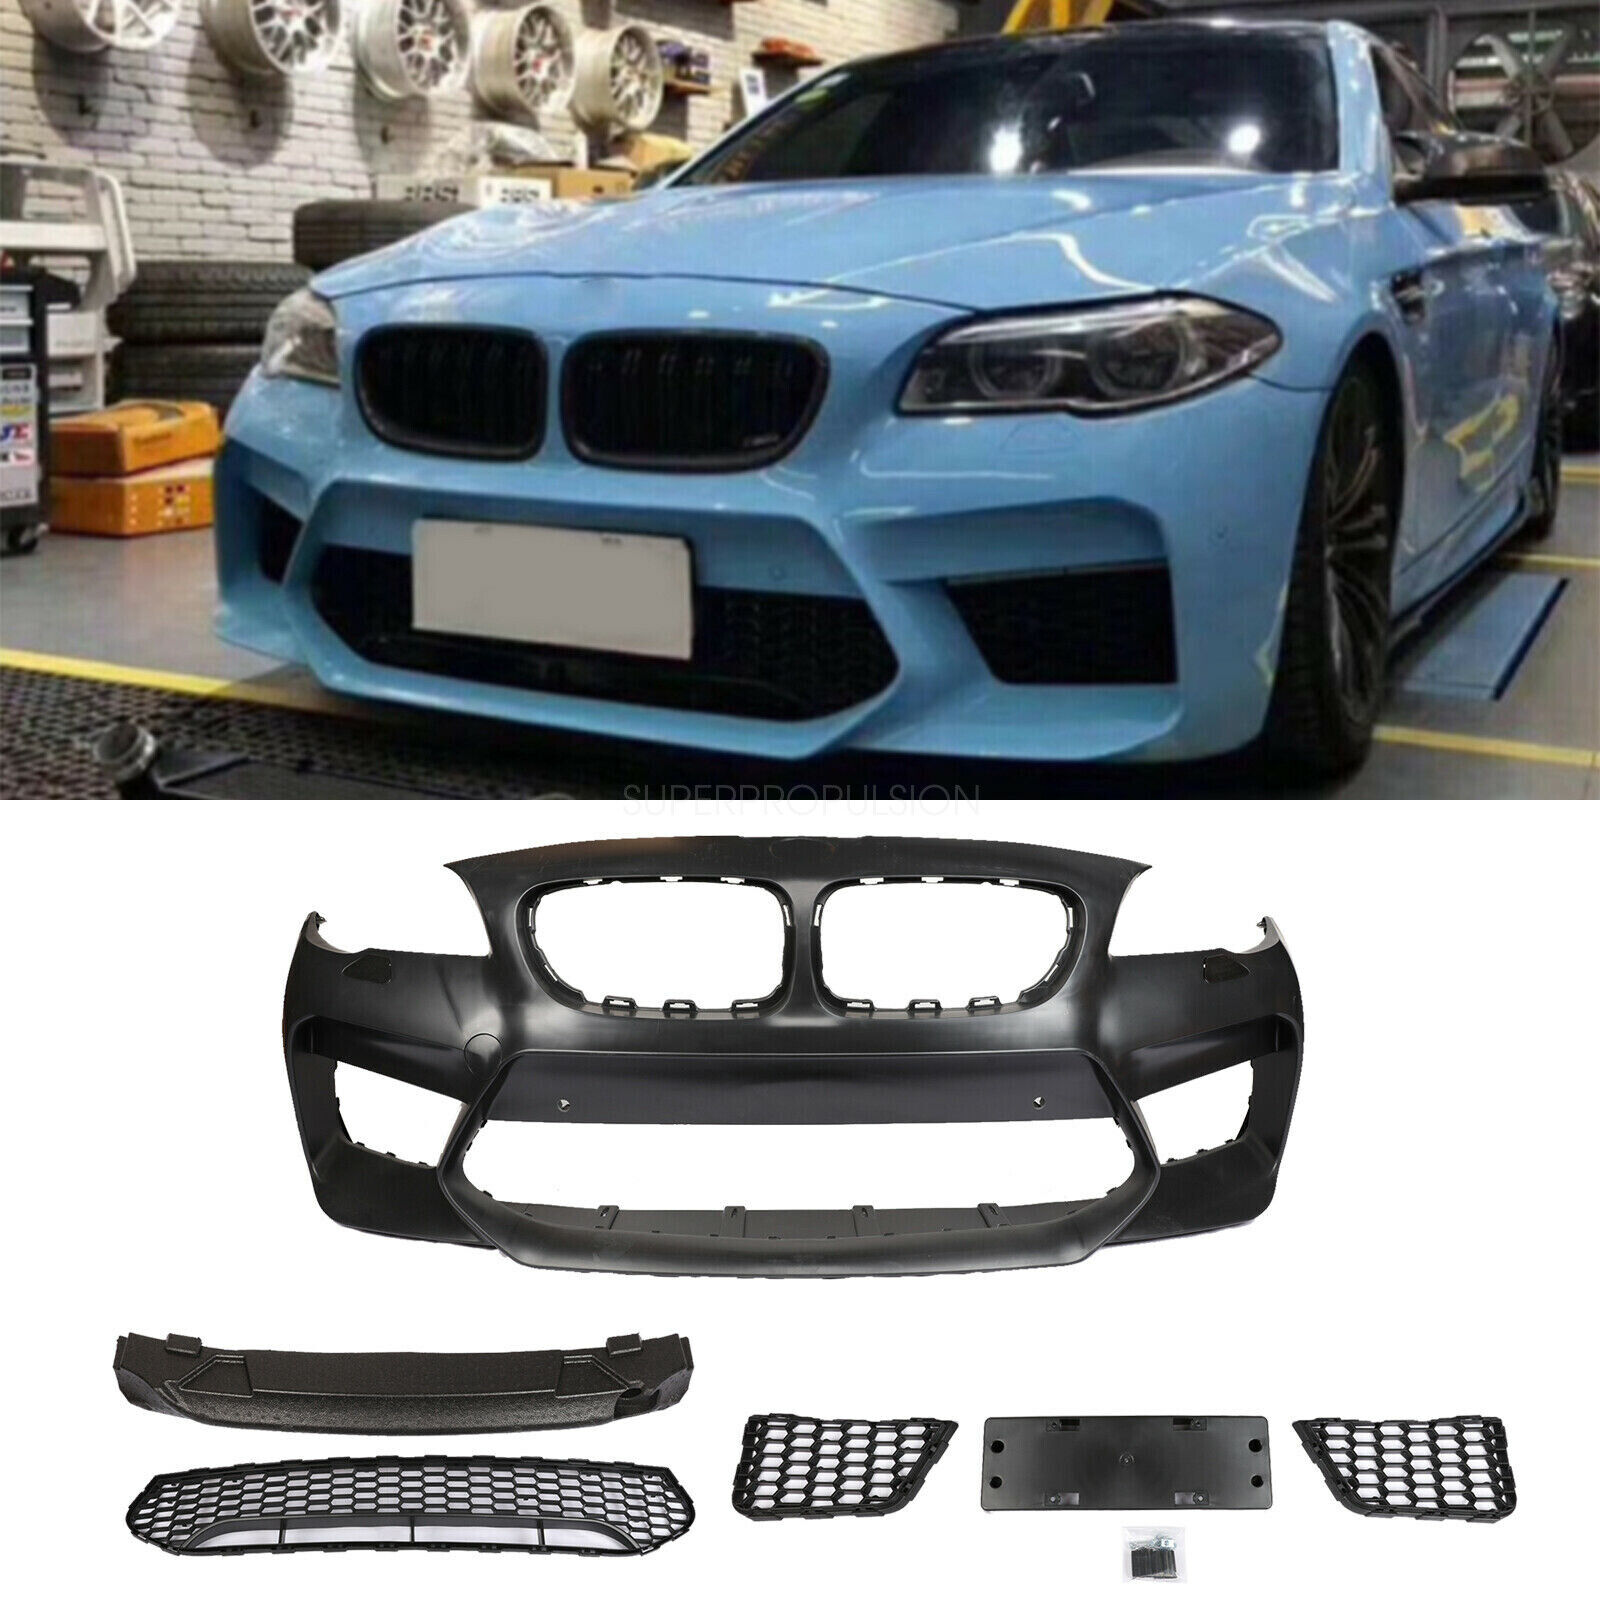 G30 M5 Look style Front Bumper fit for BMW 5 Series F10 M5 style 11-17  W/ PDC